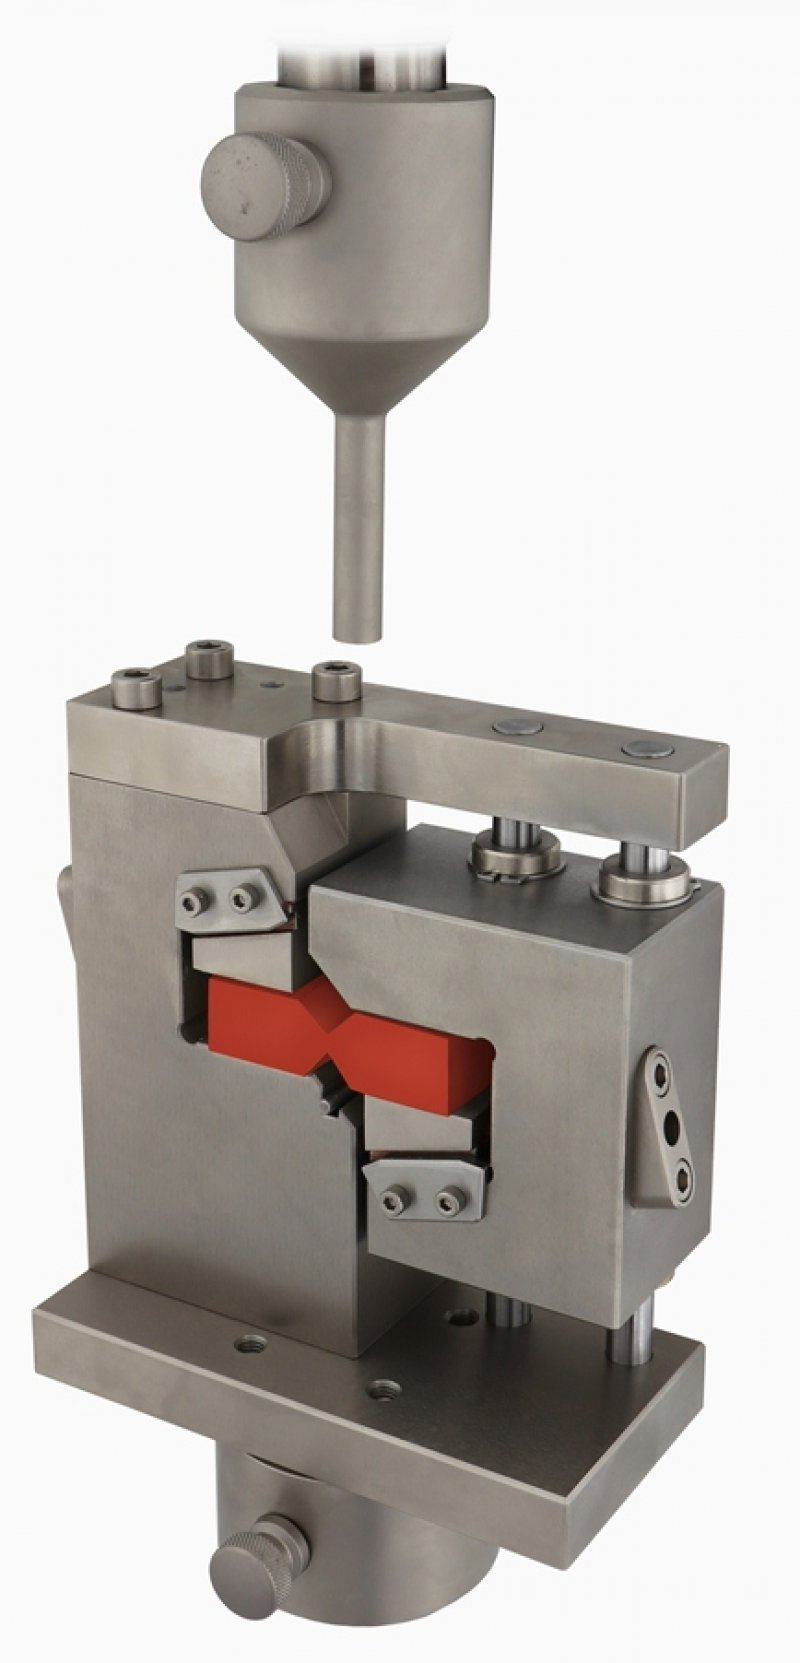 ASTM D5379 V-Notched Shear Test Fixture for Composite Materials